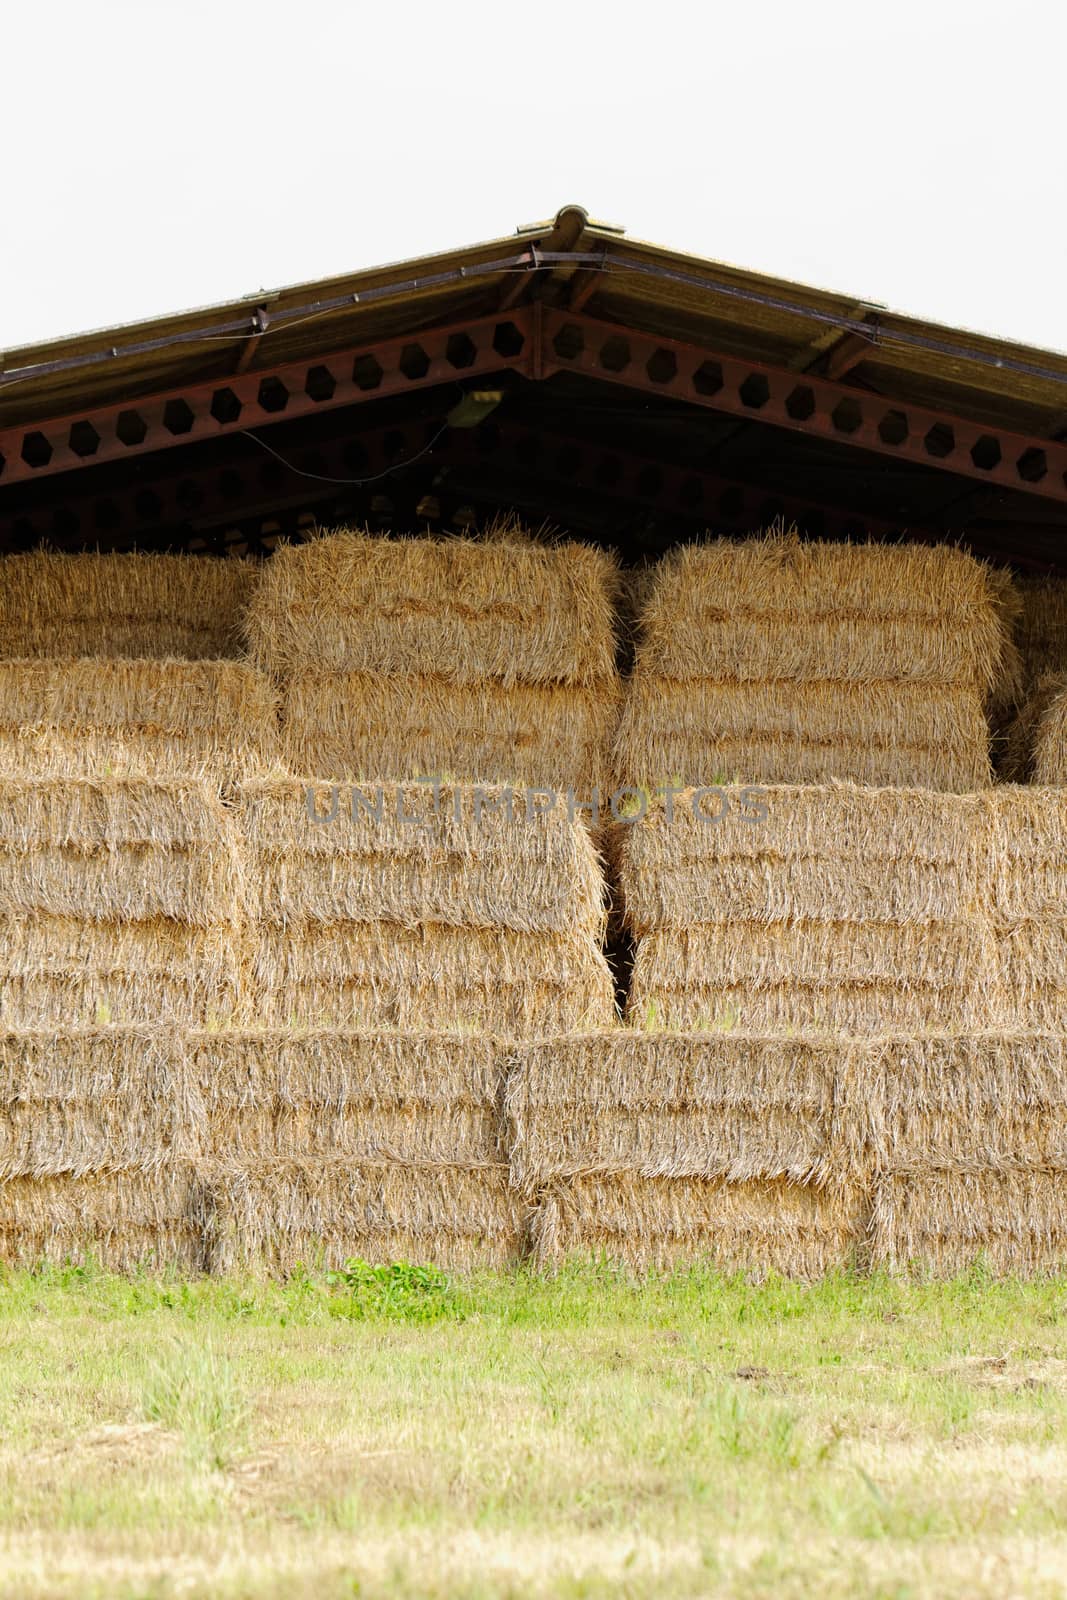 straw bales under the roof in the meadow